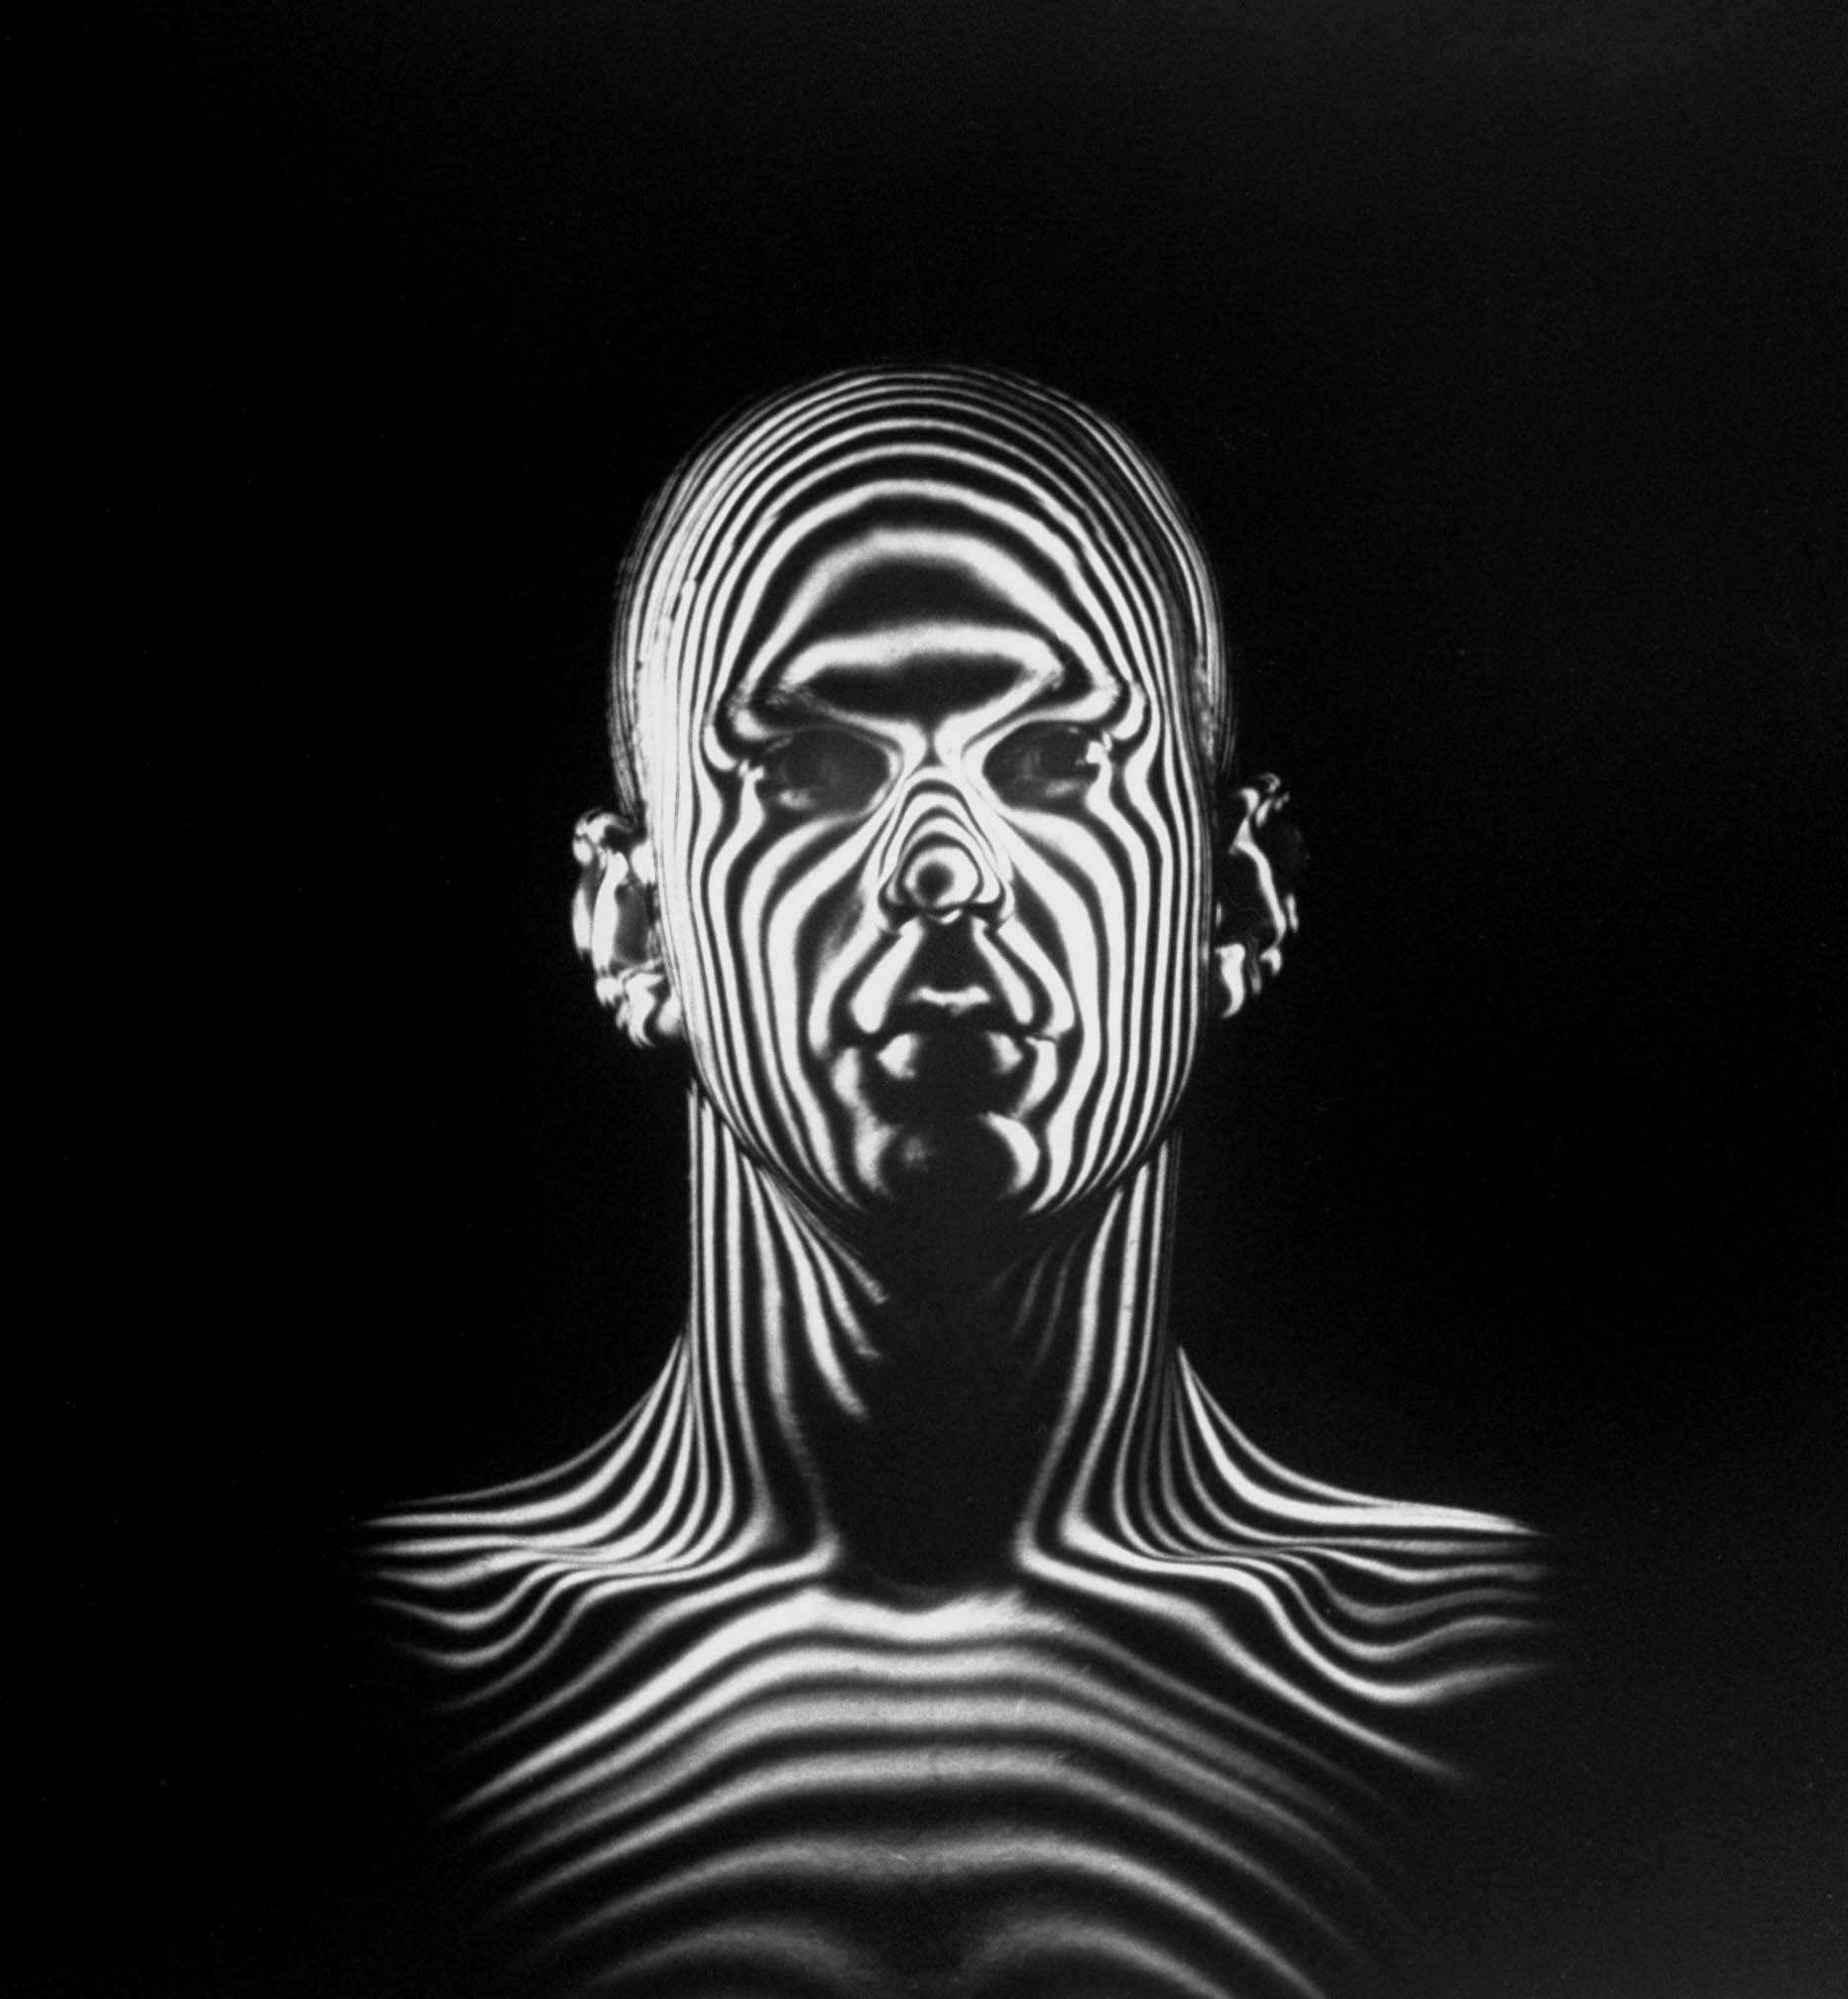 1954 | Light beams create a contour map of a human head during an Air Force study of jet-pilot helmets. Originally published, as the cover image, on the December 6, 1954, issue of LIFE.